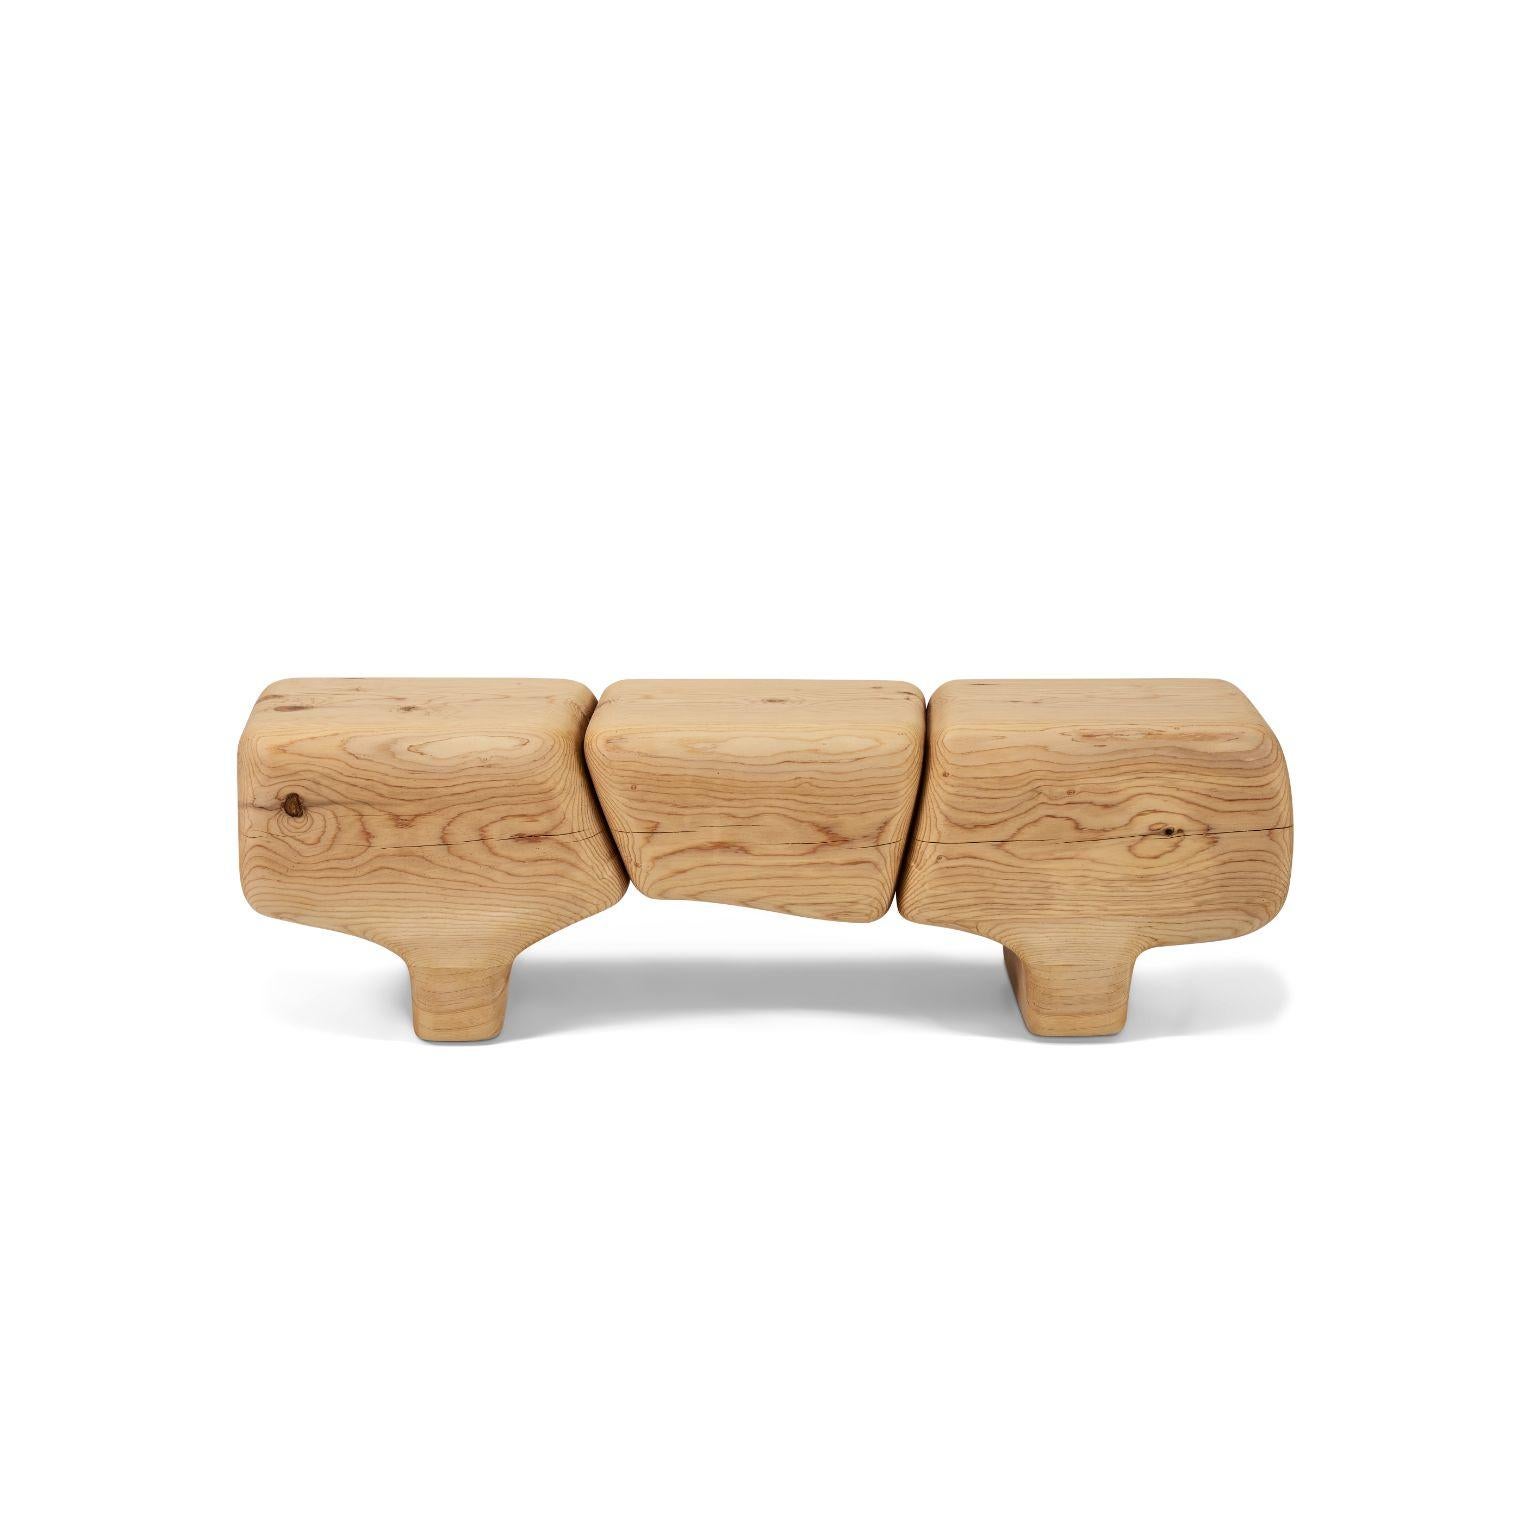 Aromatique Cedre sculptural bench by Contemporary Ecowood
Dimensions: W 118 x D 30 x H 37 cm
Materials: Cedre
Finishing: Monocoat Wood Oil

Contemporary Ecowood’s story began in a craft workshop in 2009. Our wood passion made us focus on fallen